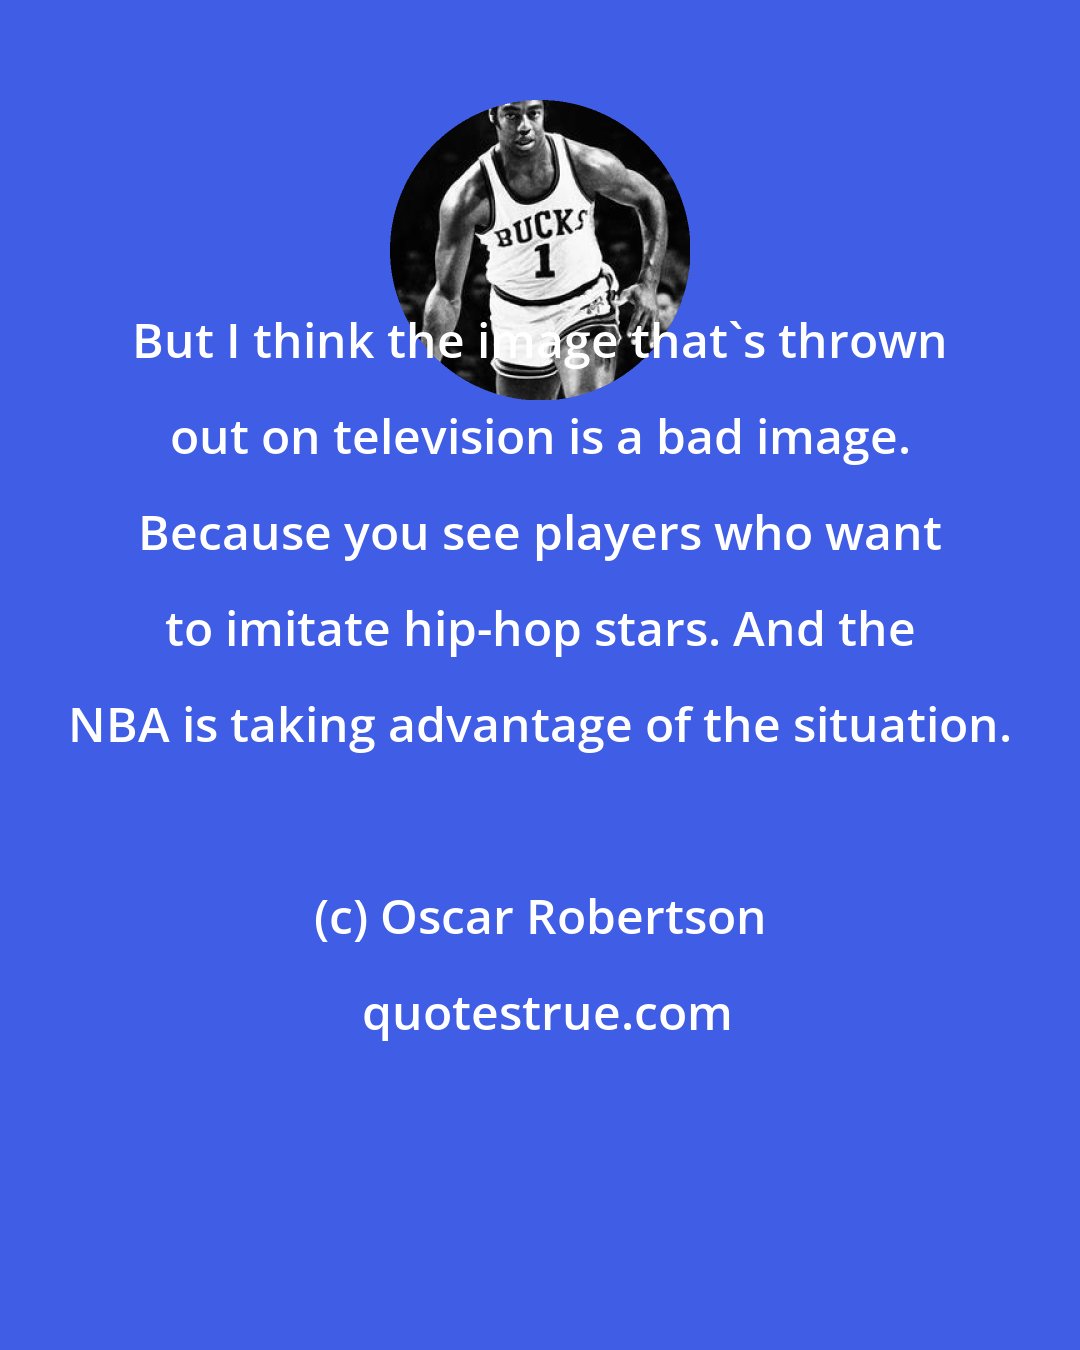 Oscar Robertson: But I think the image that's thrown out on television is a bad image. Because you see players who want to imitate hip-hop stars. And the NBA is taking advantage of the situation.